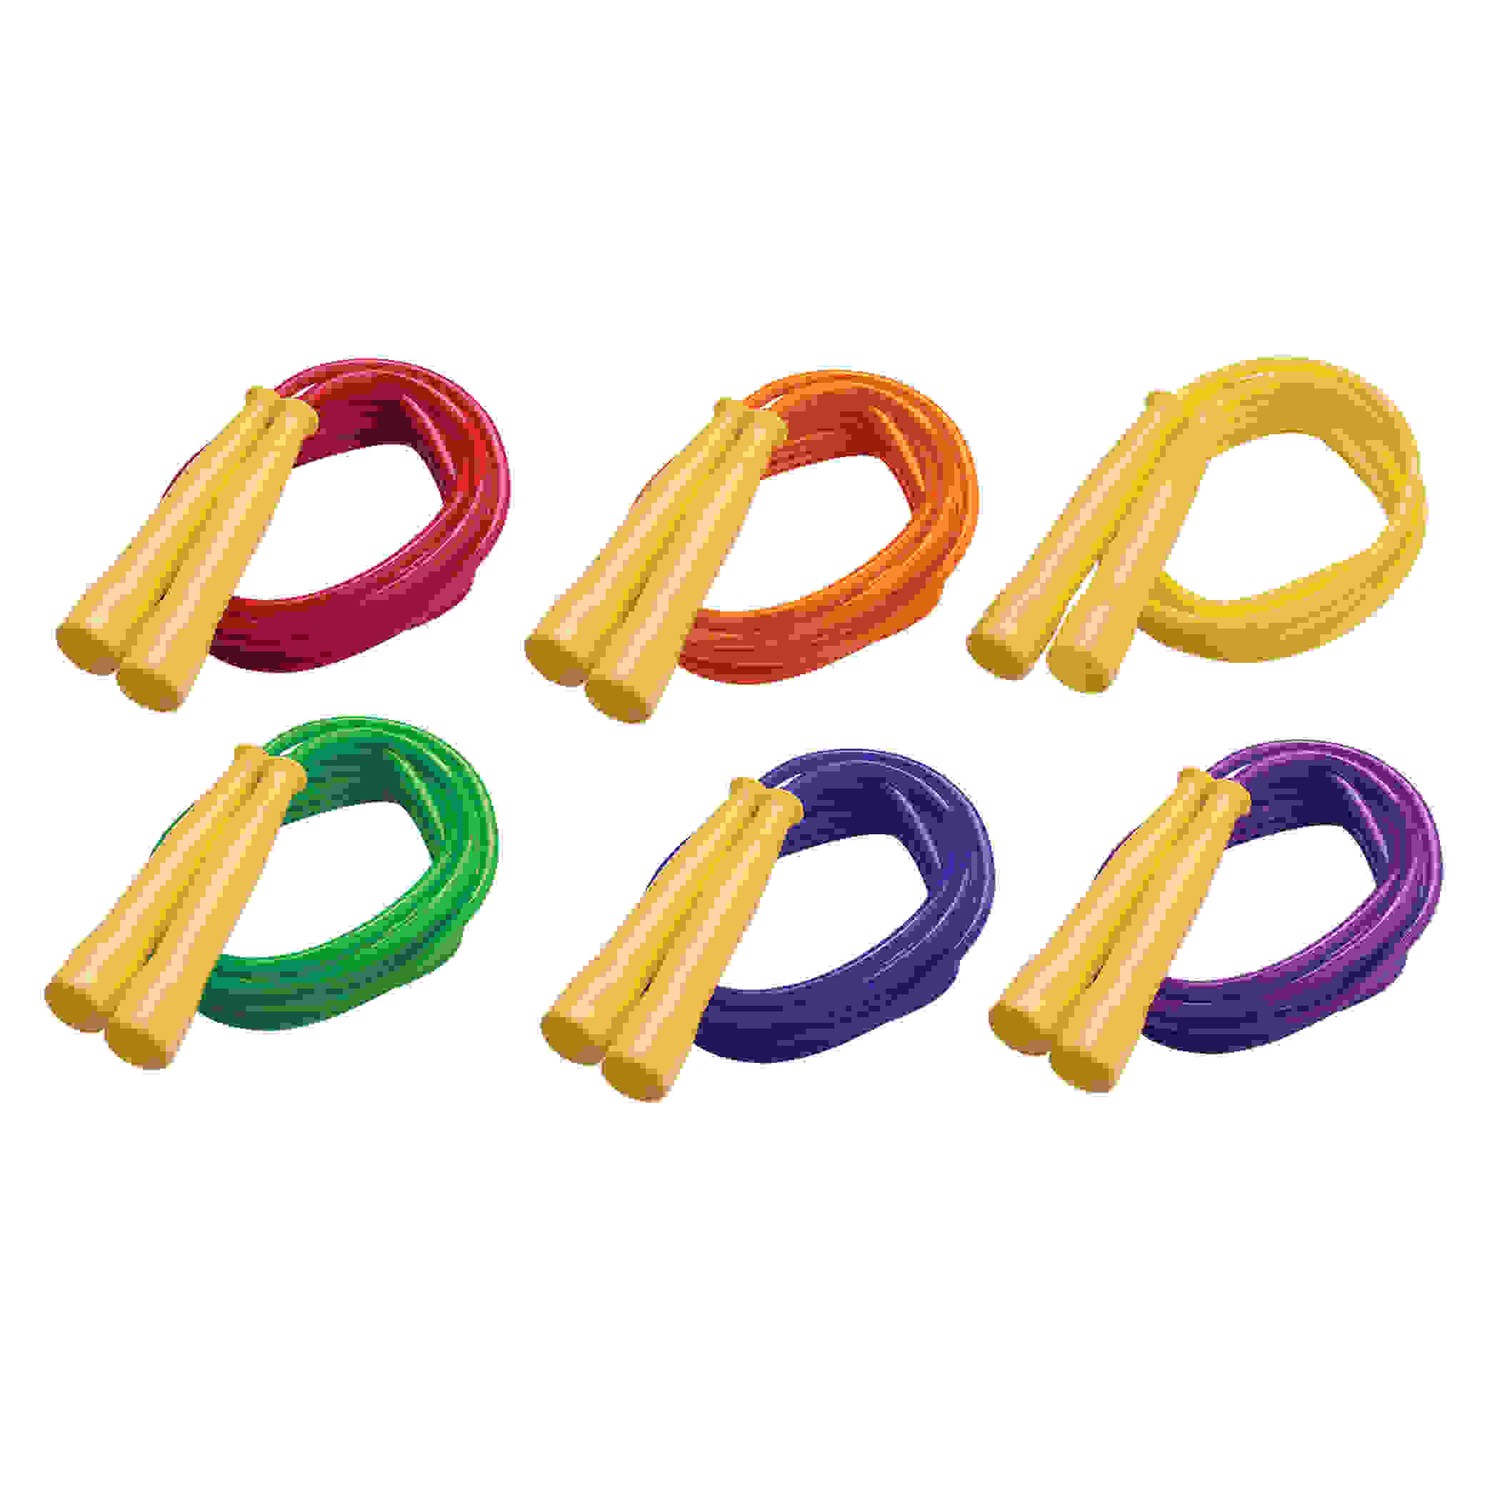 Licorice Speed Jump Rope, 8' with Yellow Handles, Pack of 6